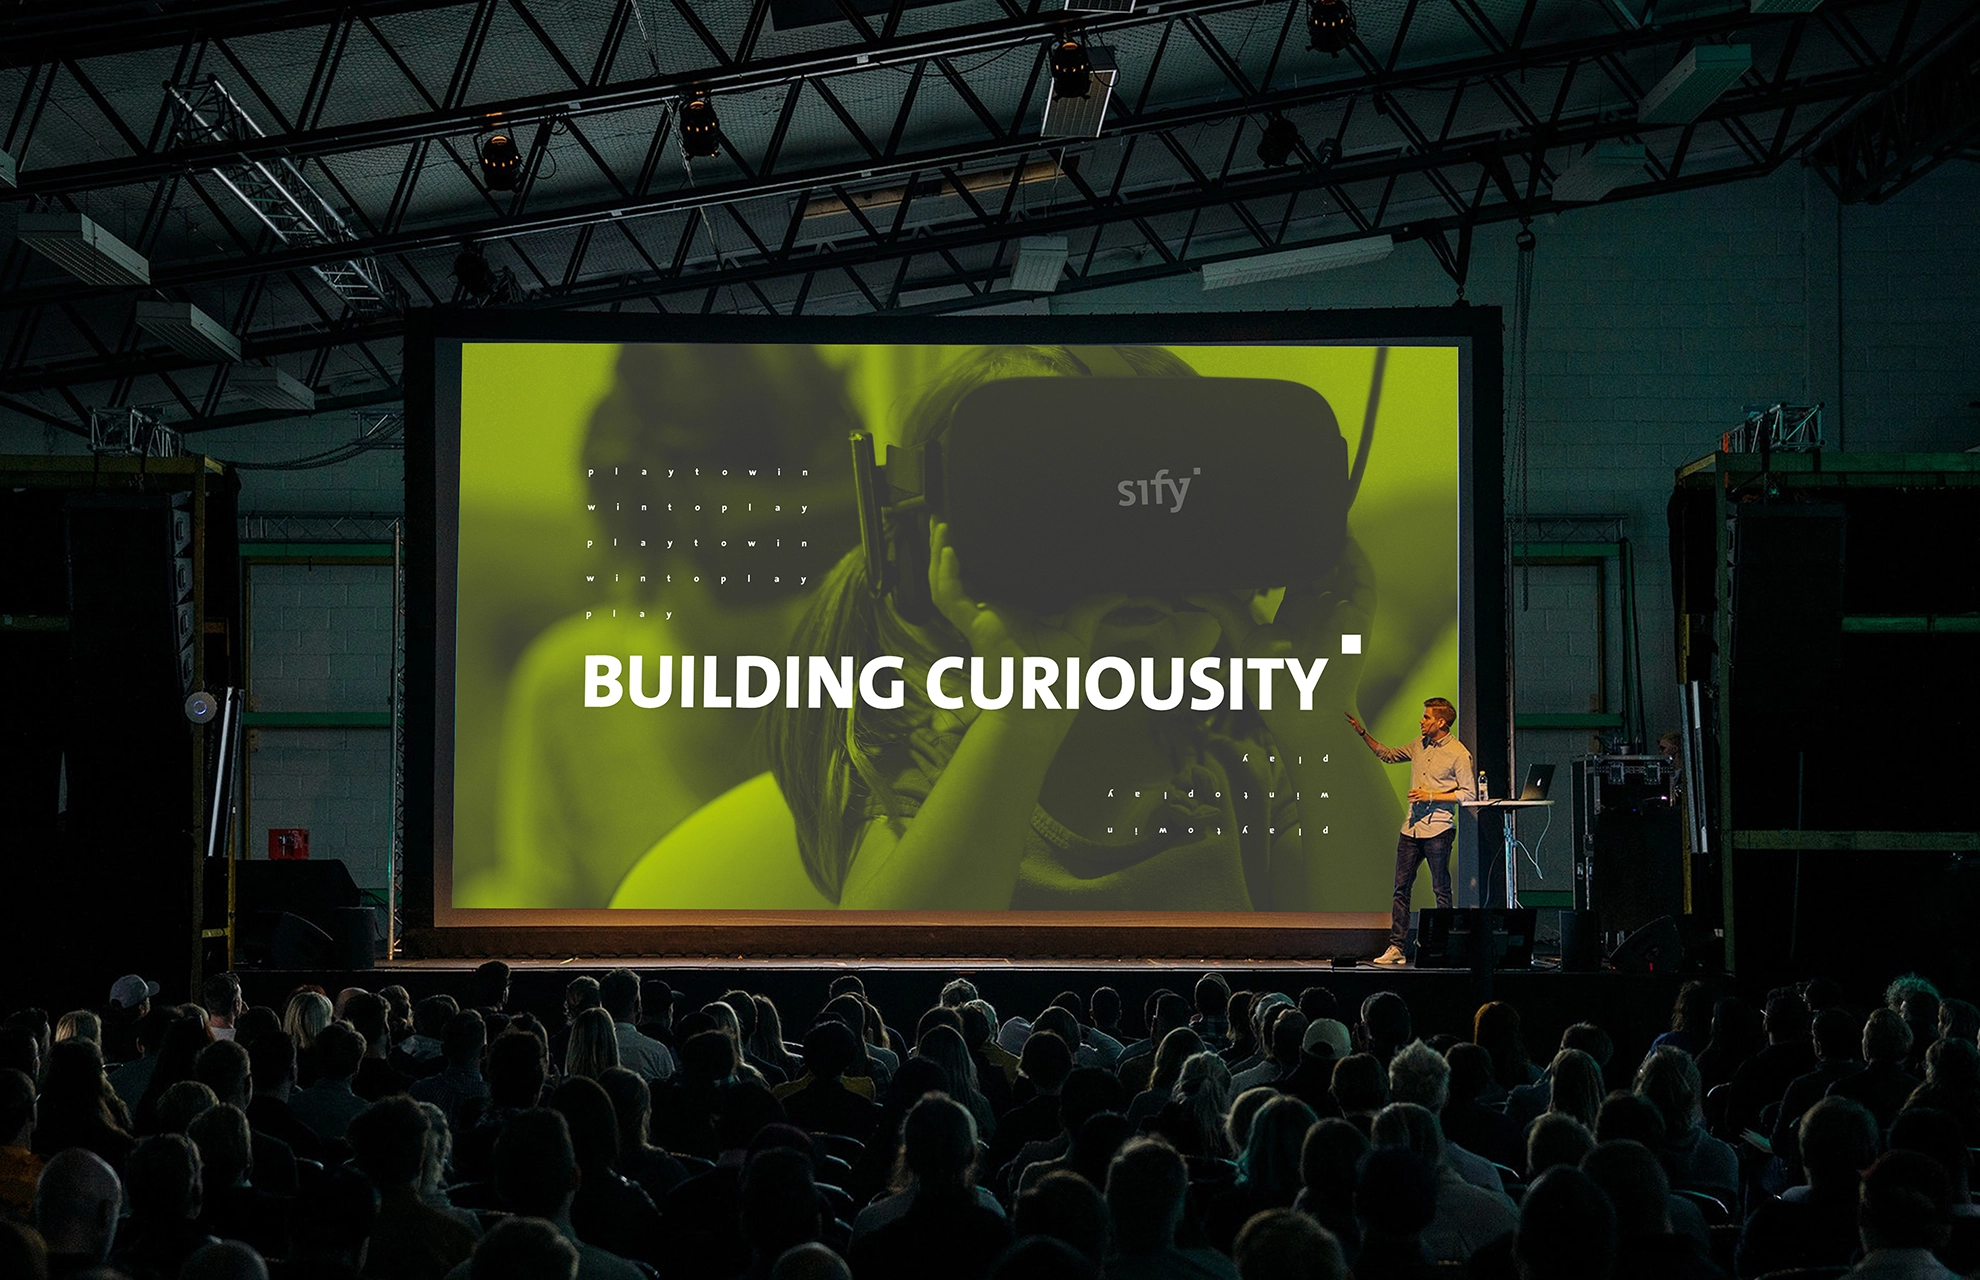 lopez-design-sify-people-conference-launch-screen-presentation-branding